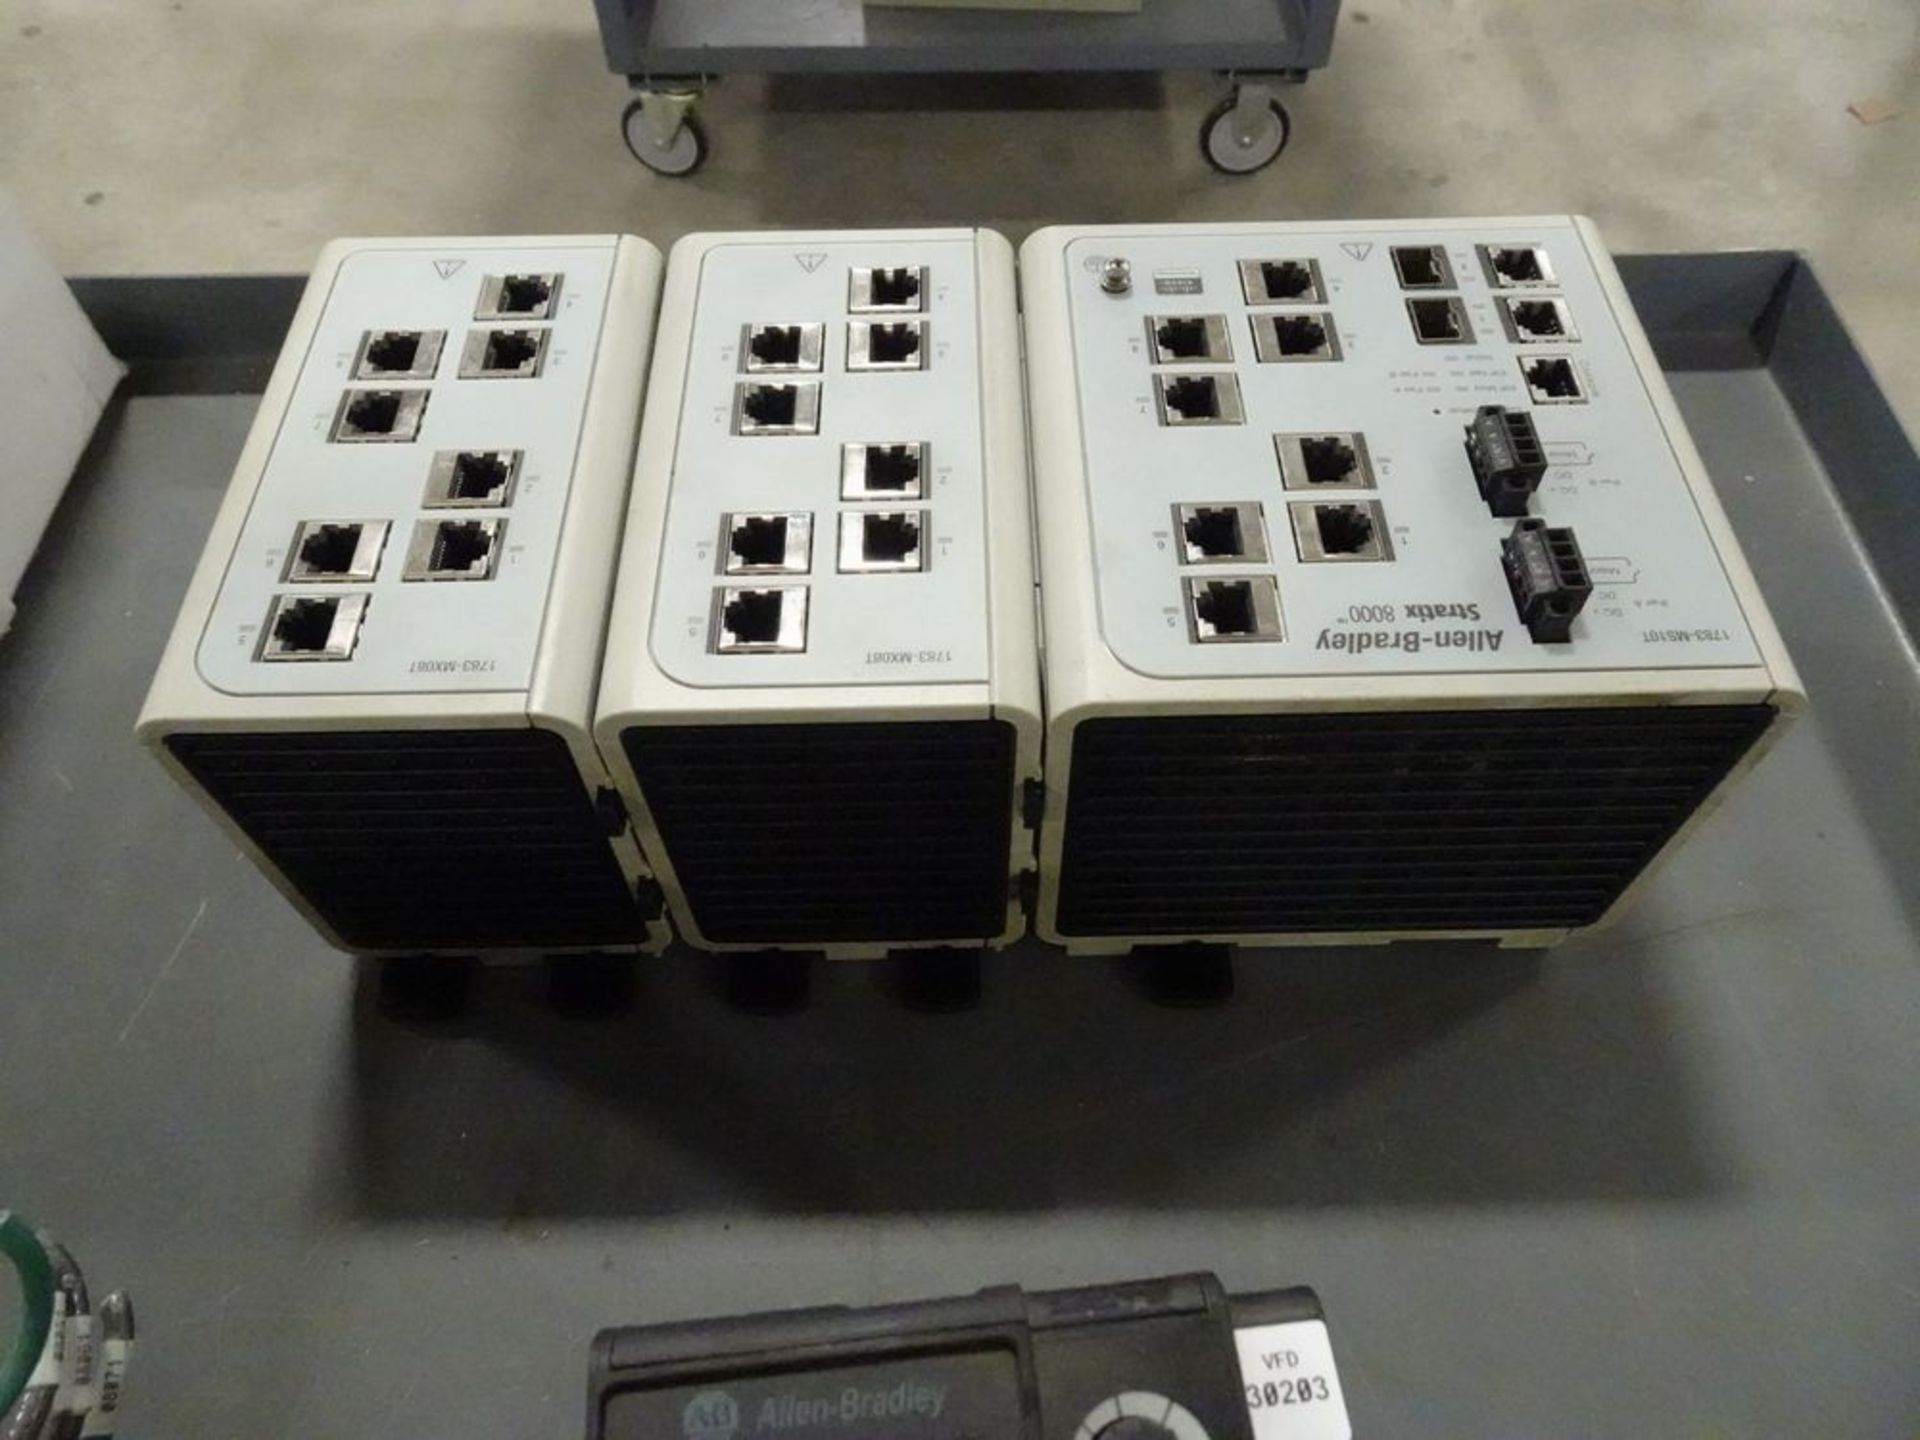 ASSORTED PRODUCT, ALLEN-BRADLEY SWITCHES, POWERFLEX DRIVES, ETC. - Image 6 of 6